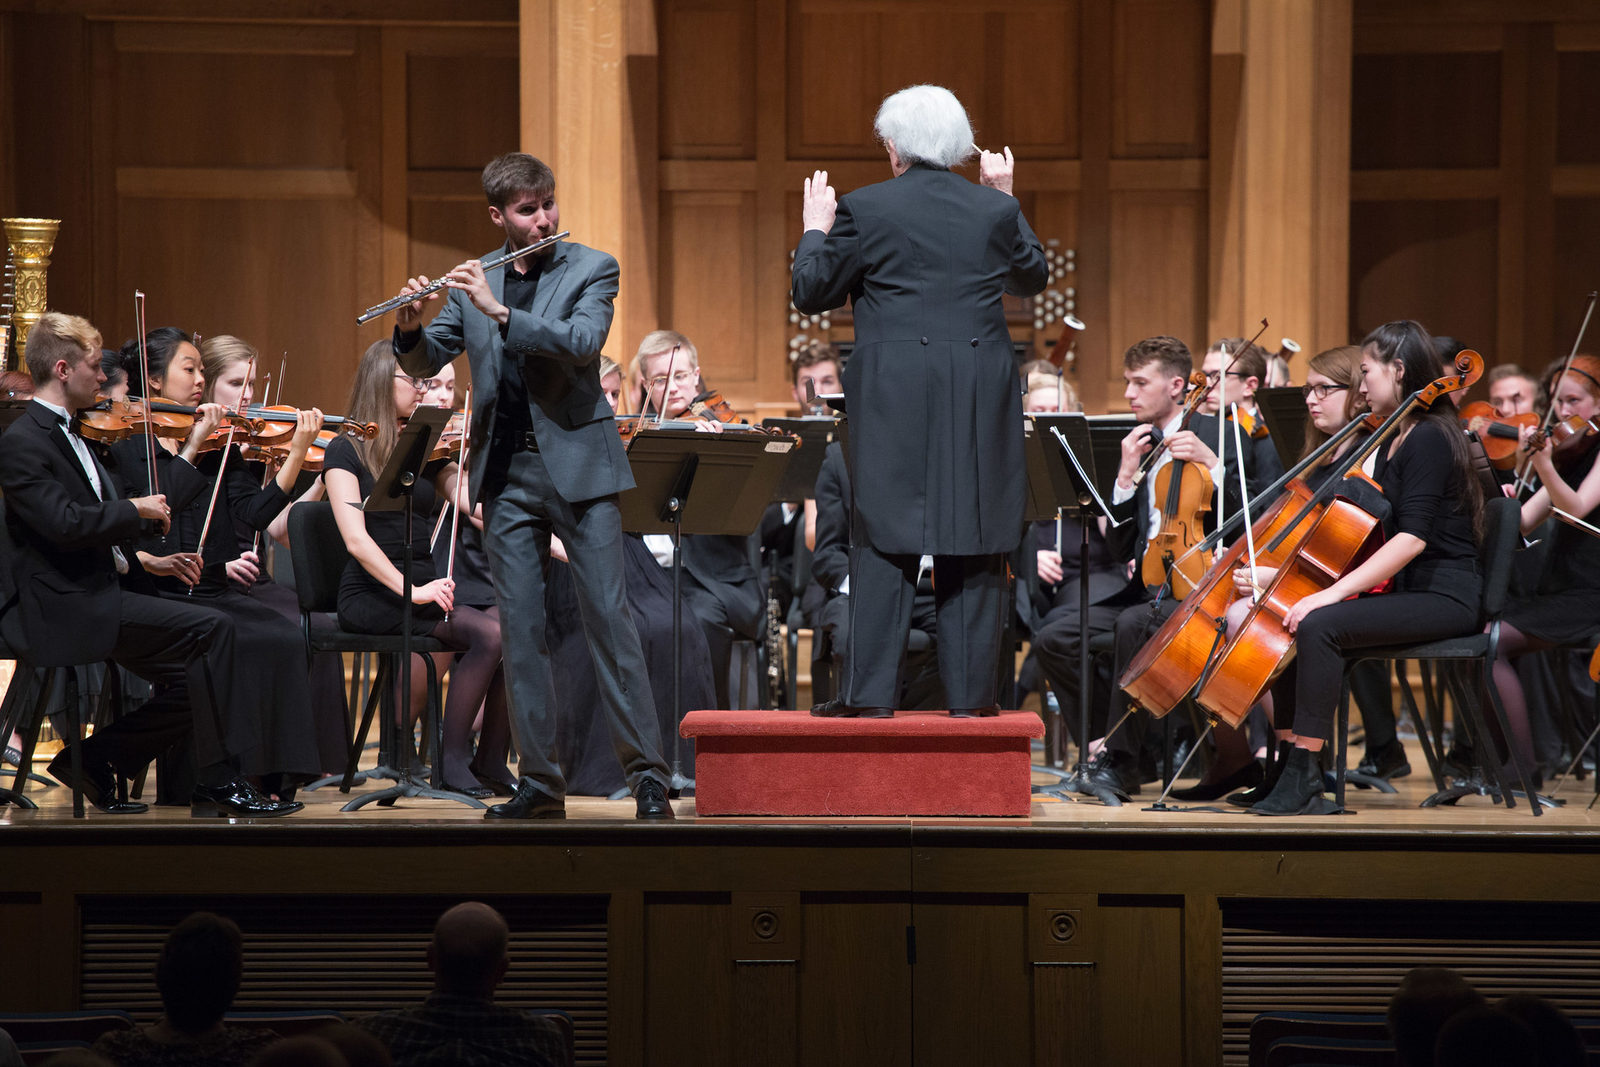 Student Leo Sussman performing with the Lawrence Symphony Orchestra